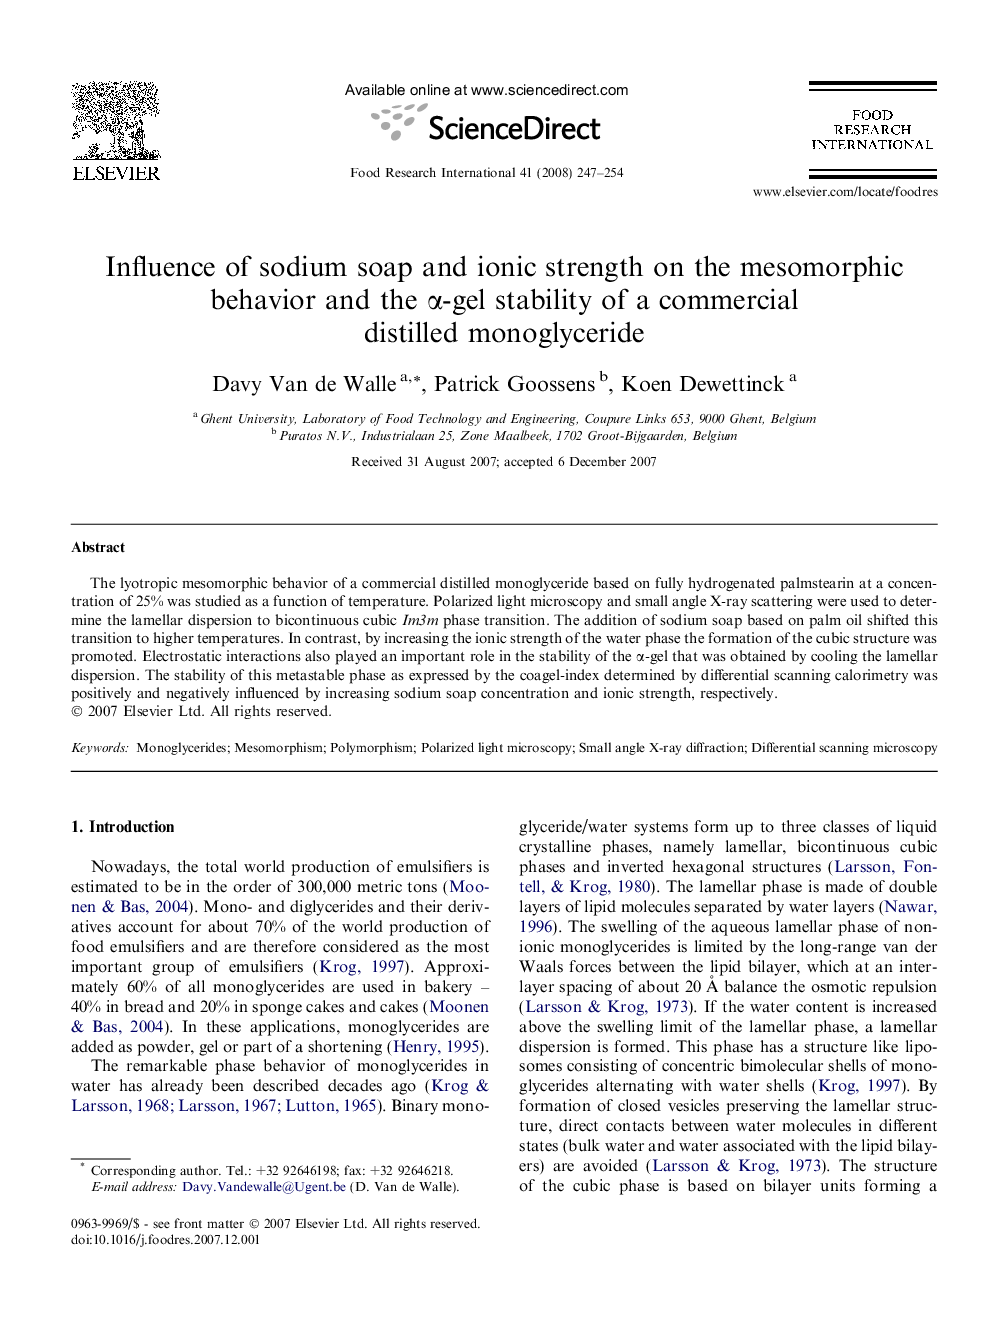 Influence of sodium soap and ionic strength on the mesomorphic behavior and the α-gel stability of a commercial distilled monoglyceride